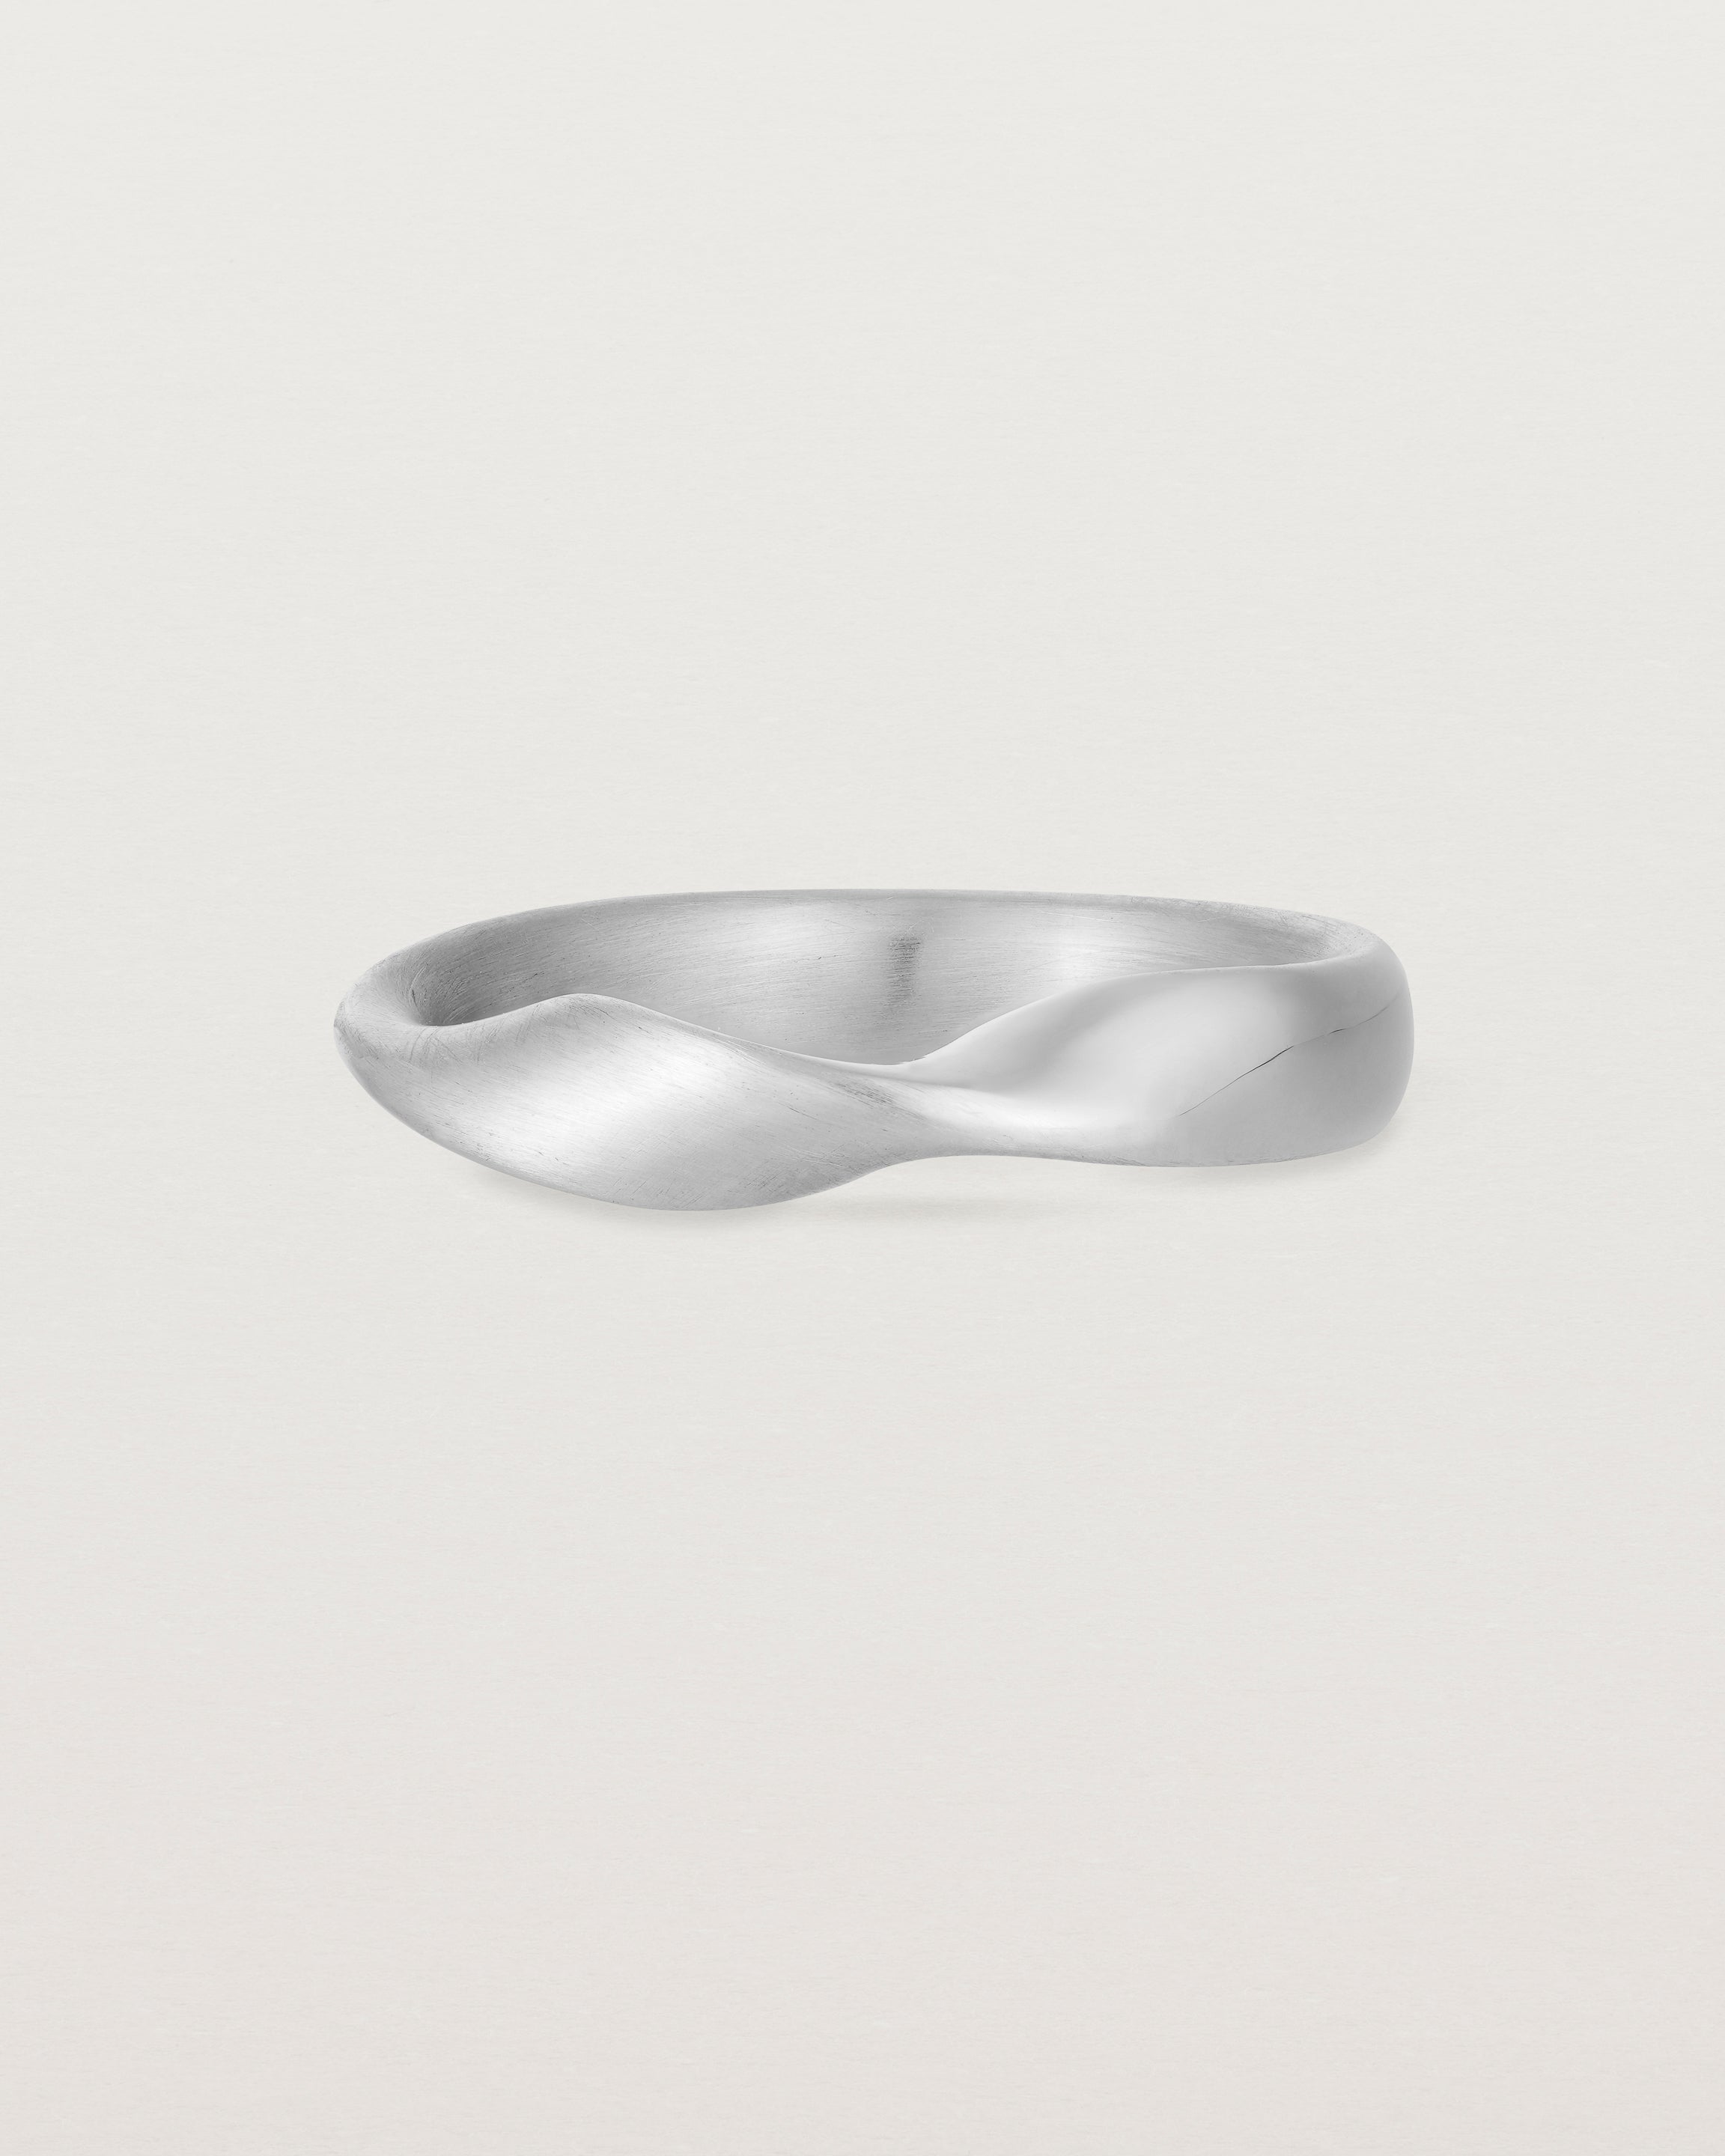 Front view of the Ellipse / Shift Ring in Sterling Silver.